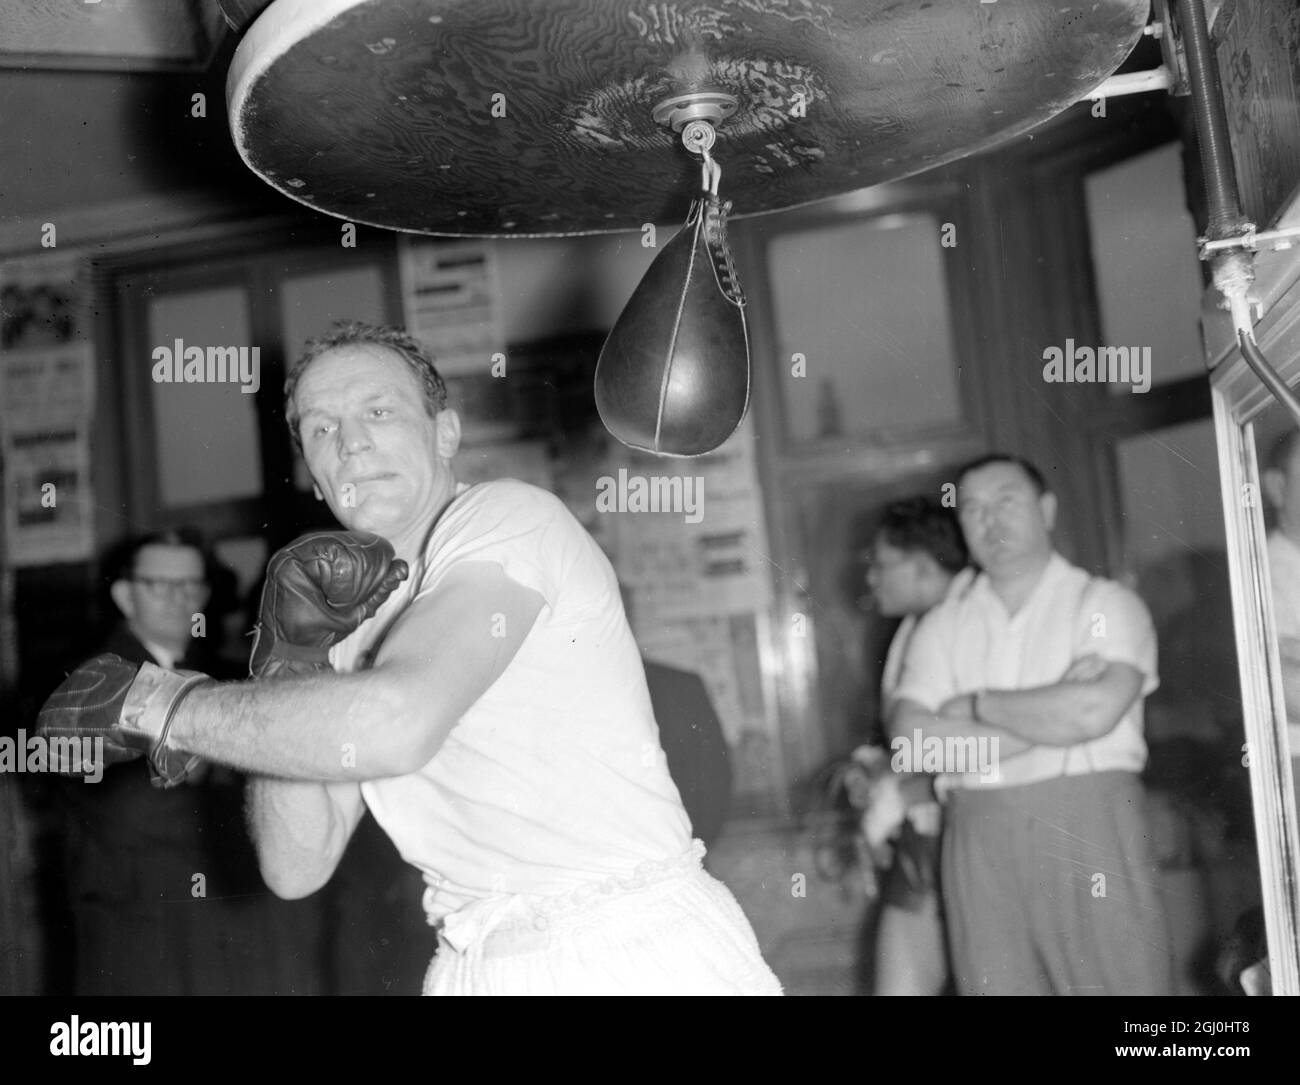 London: A grin faced Henry Cooper, British and Empire Heavyweight champion , puts in some practice on the high speed punch ball in readiness for his fight with American Zoro Folley at Wembley on Tuesday December 5th. Cooper has been training hard for contest for if he wins he hopes to have a crack at World Championship holder Floyd Paterson. 30 November 1961 Stock Photo